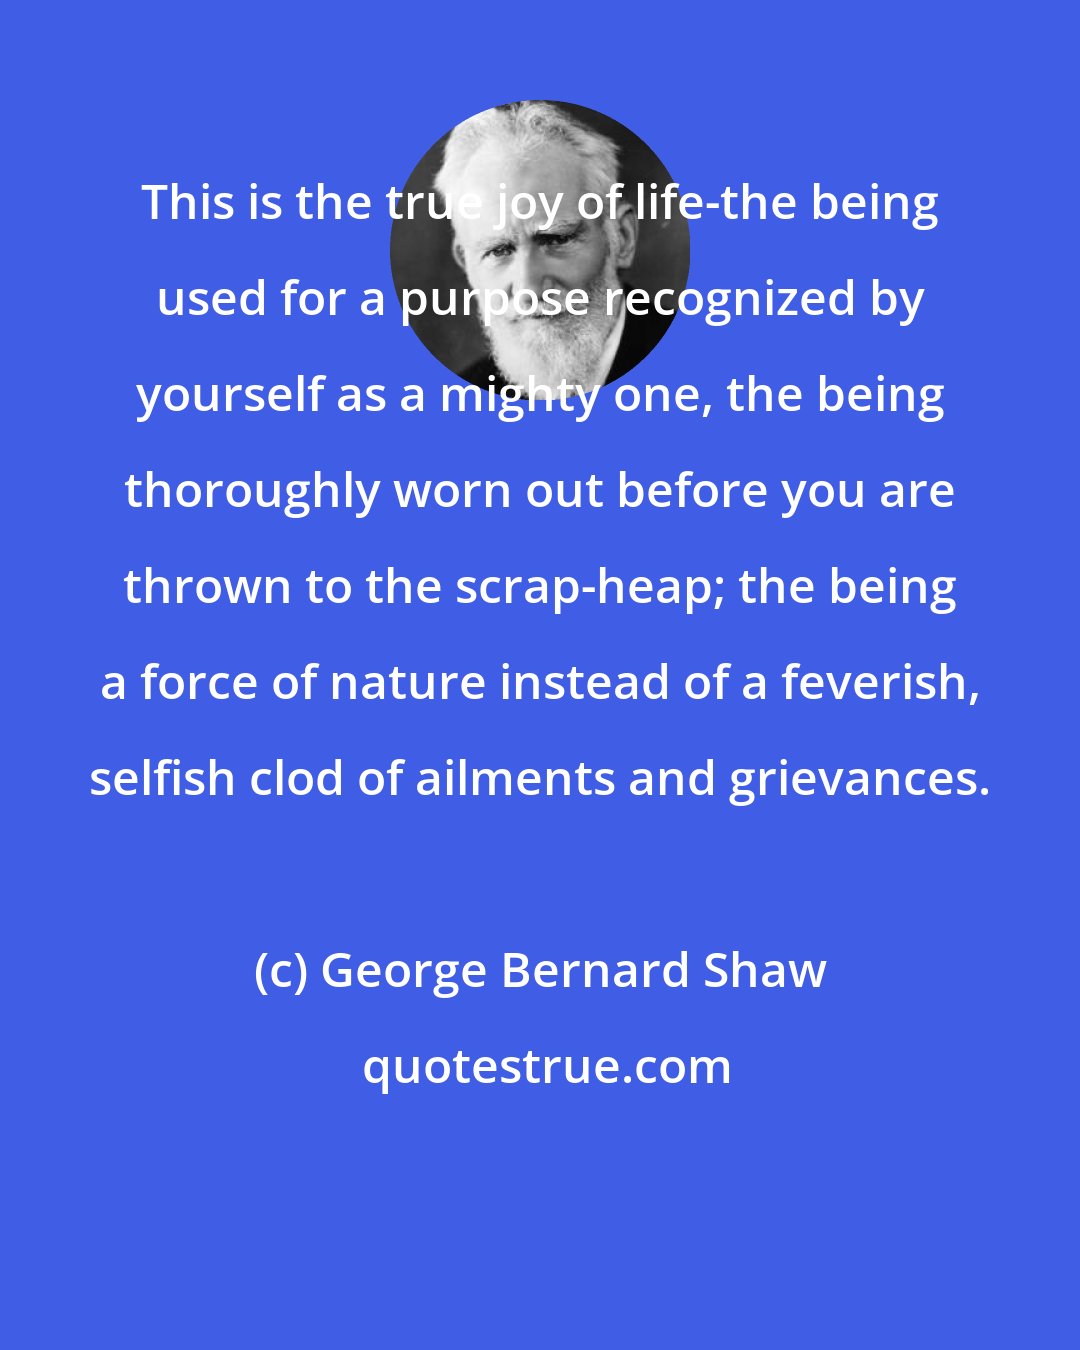 George Bernard Shaw: This is the true joy of life-the being used for a purpose recognized by yourself as a mighty one, the being thoroughly worn out before you are thrown to the scrap-heap; the being a force of nature instead of a feverish, selfish clod of ailments and grievances.